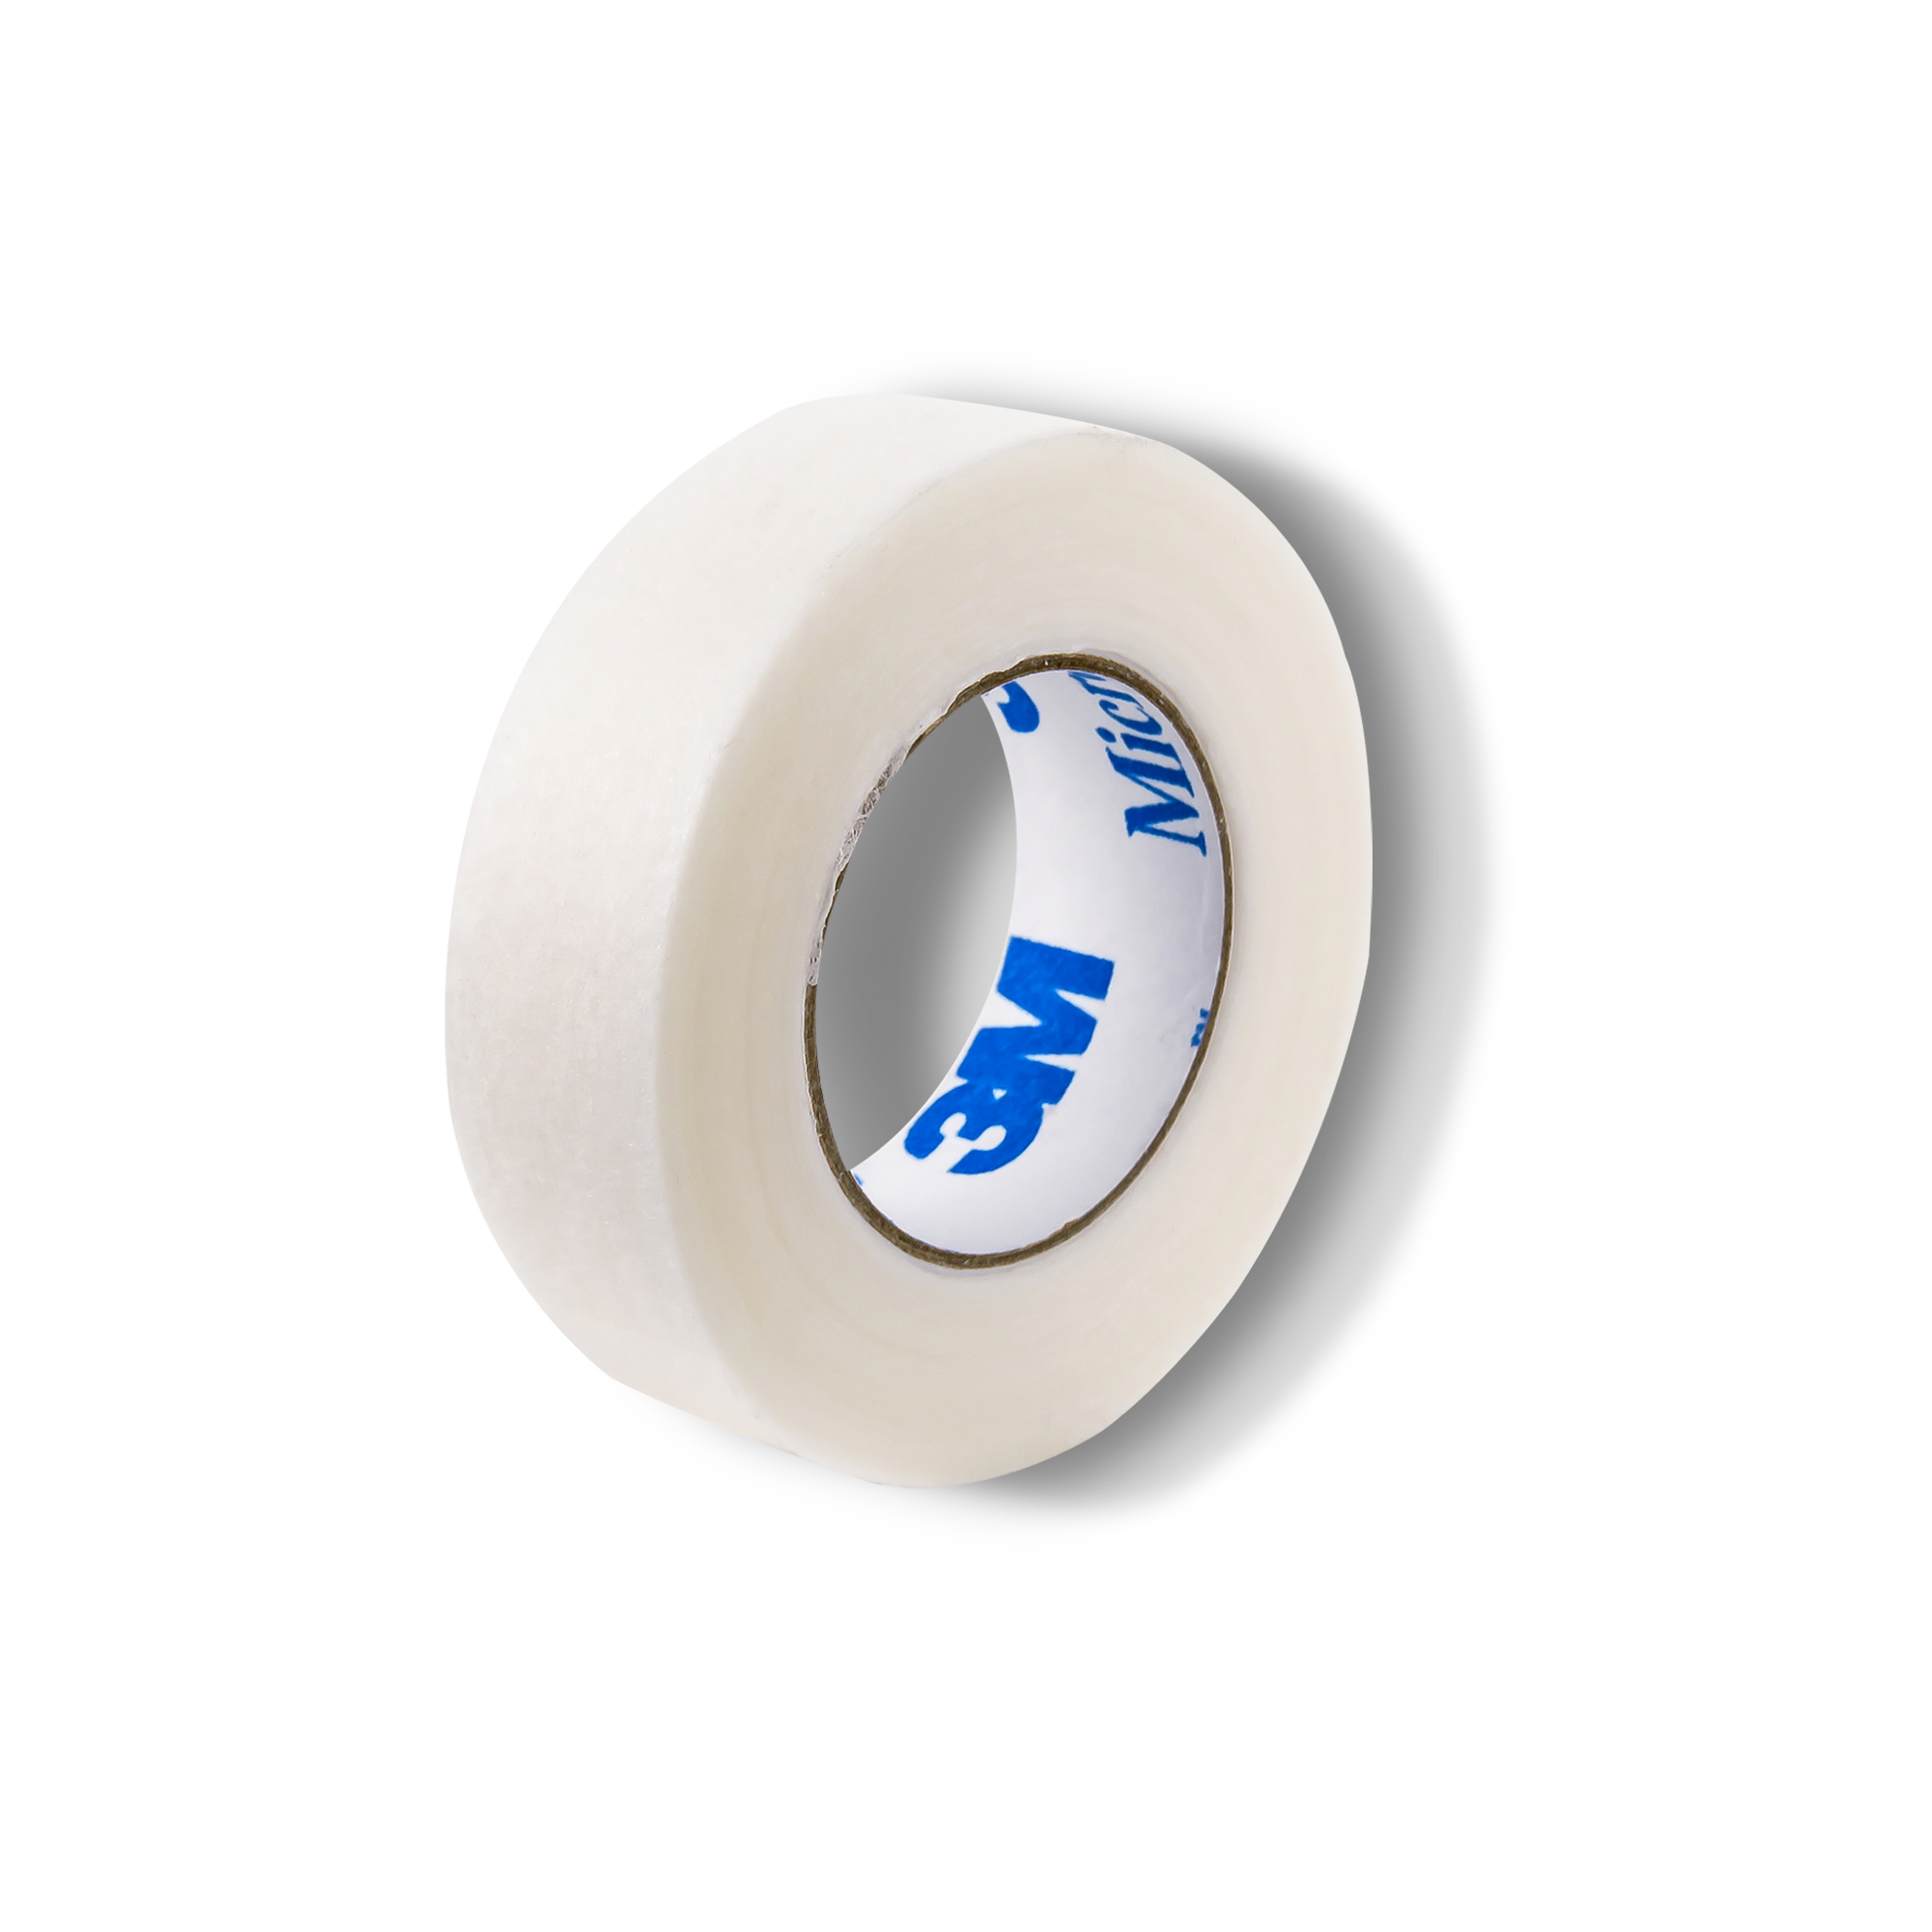 Dlux Surgical tape